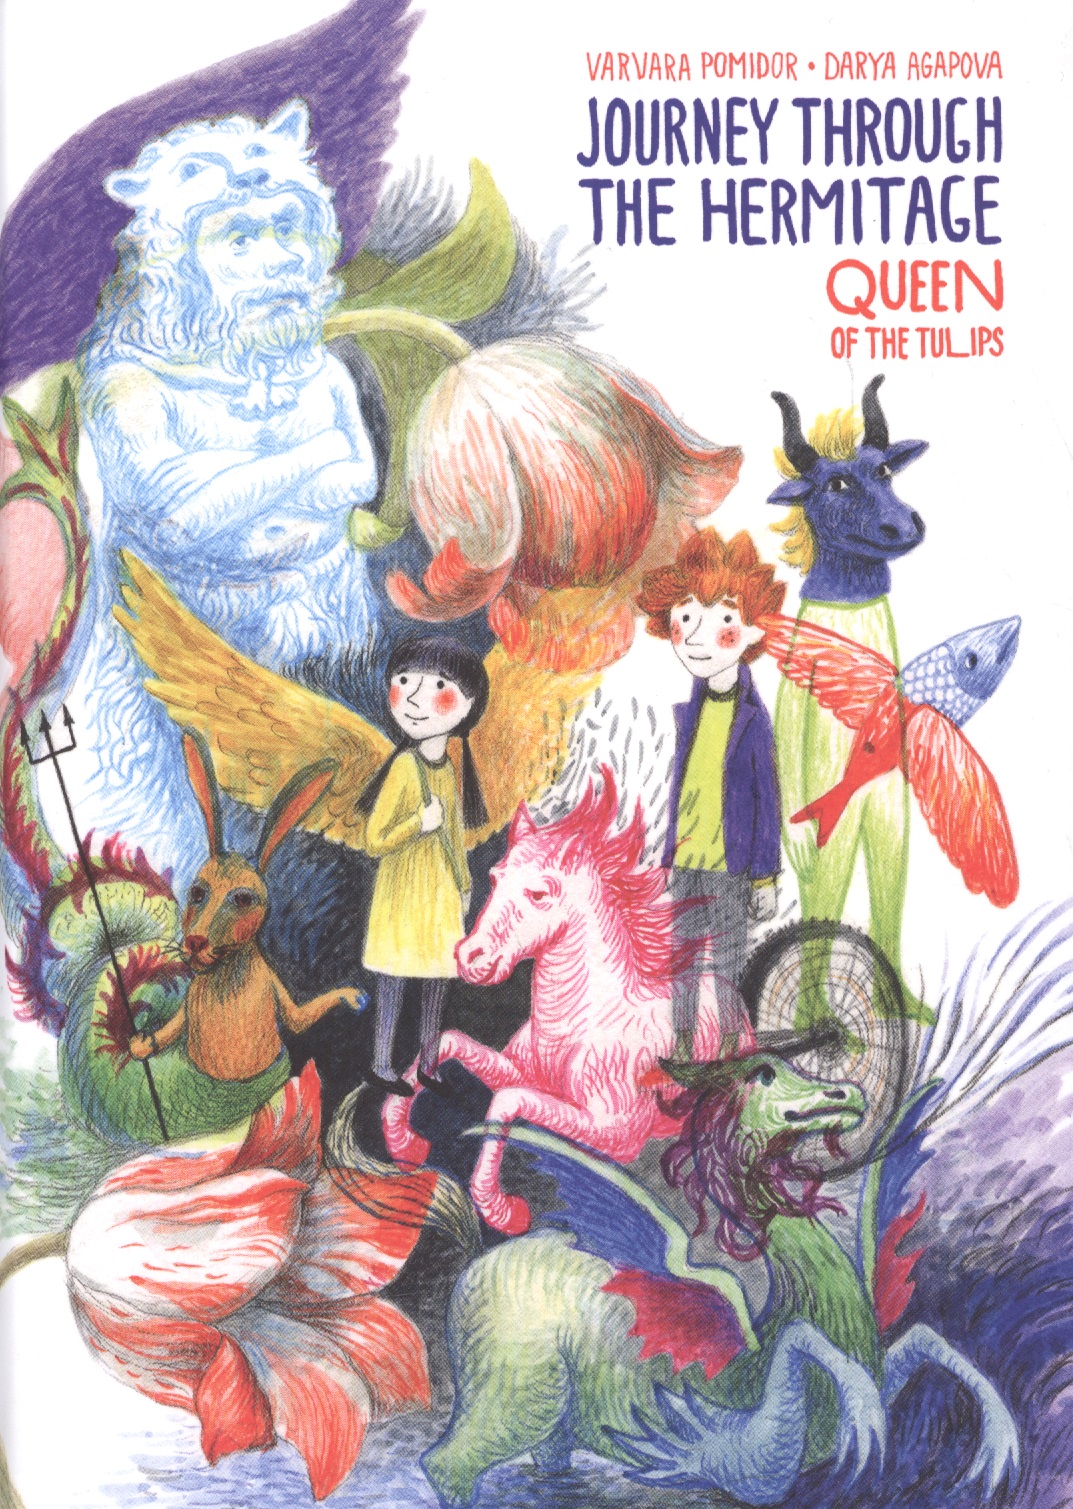 Pomidor Varvara - Journey through the Hermitage. Queen of the Tulips. Graphic novel